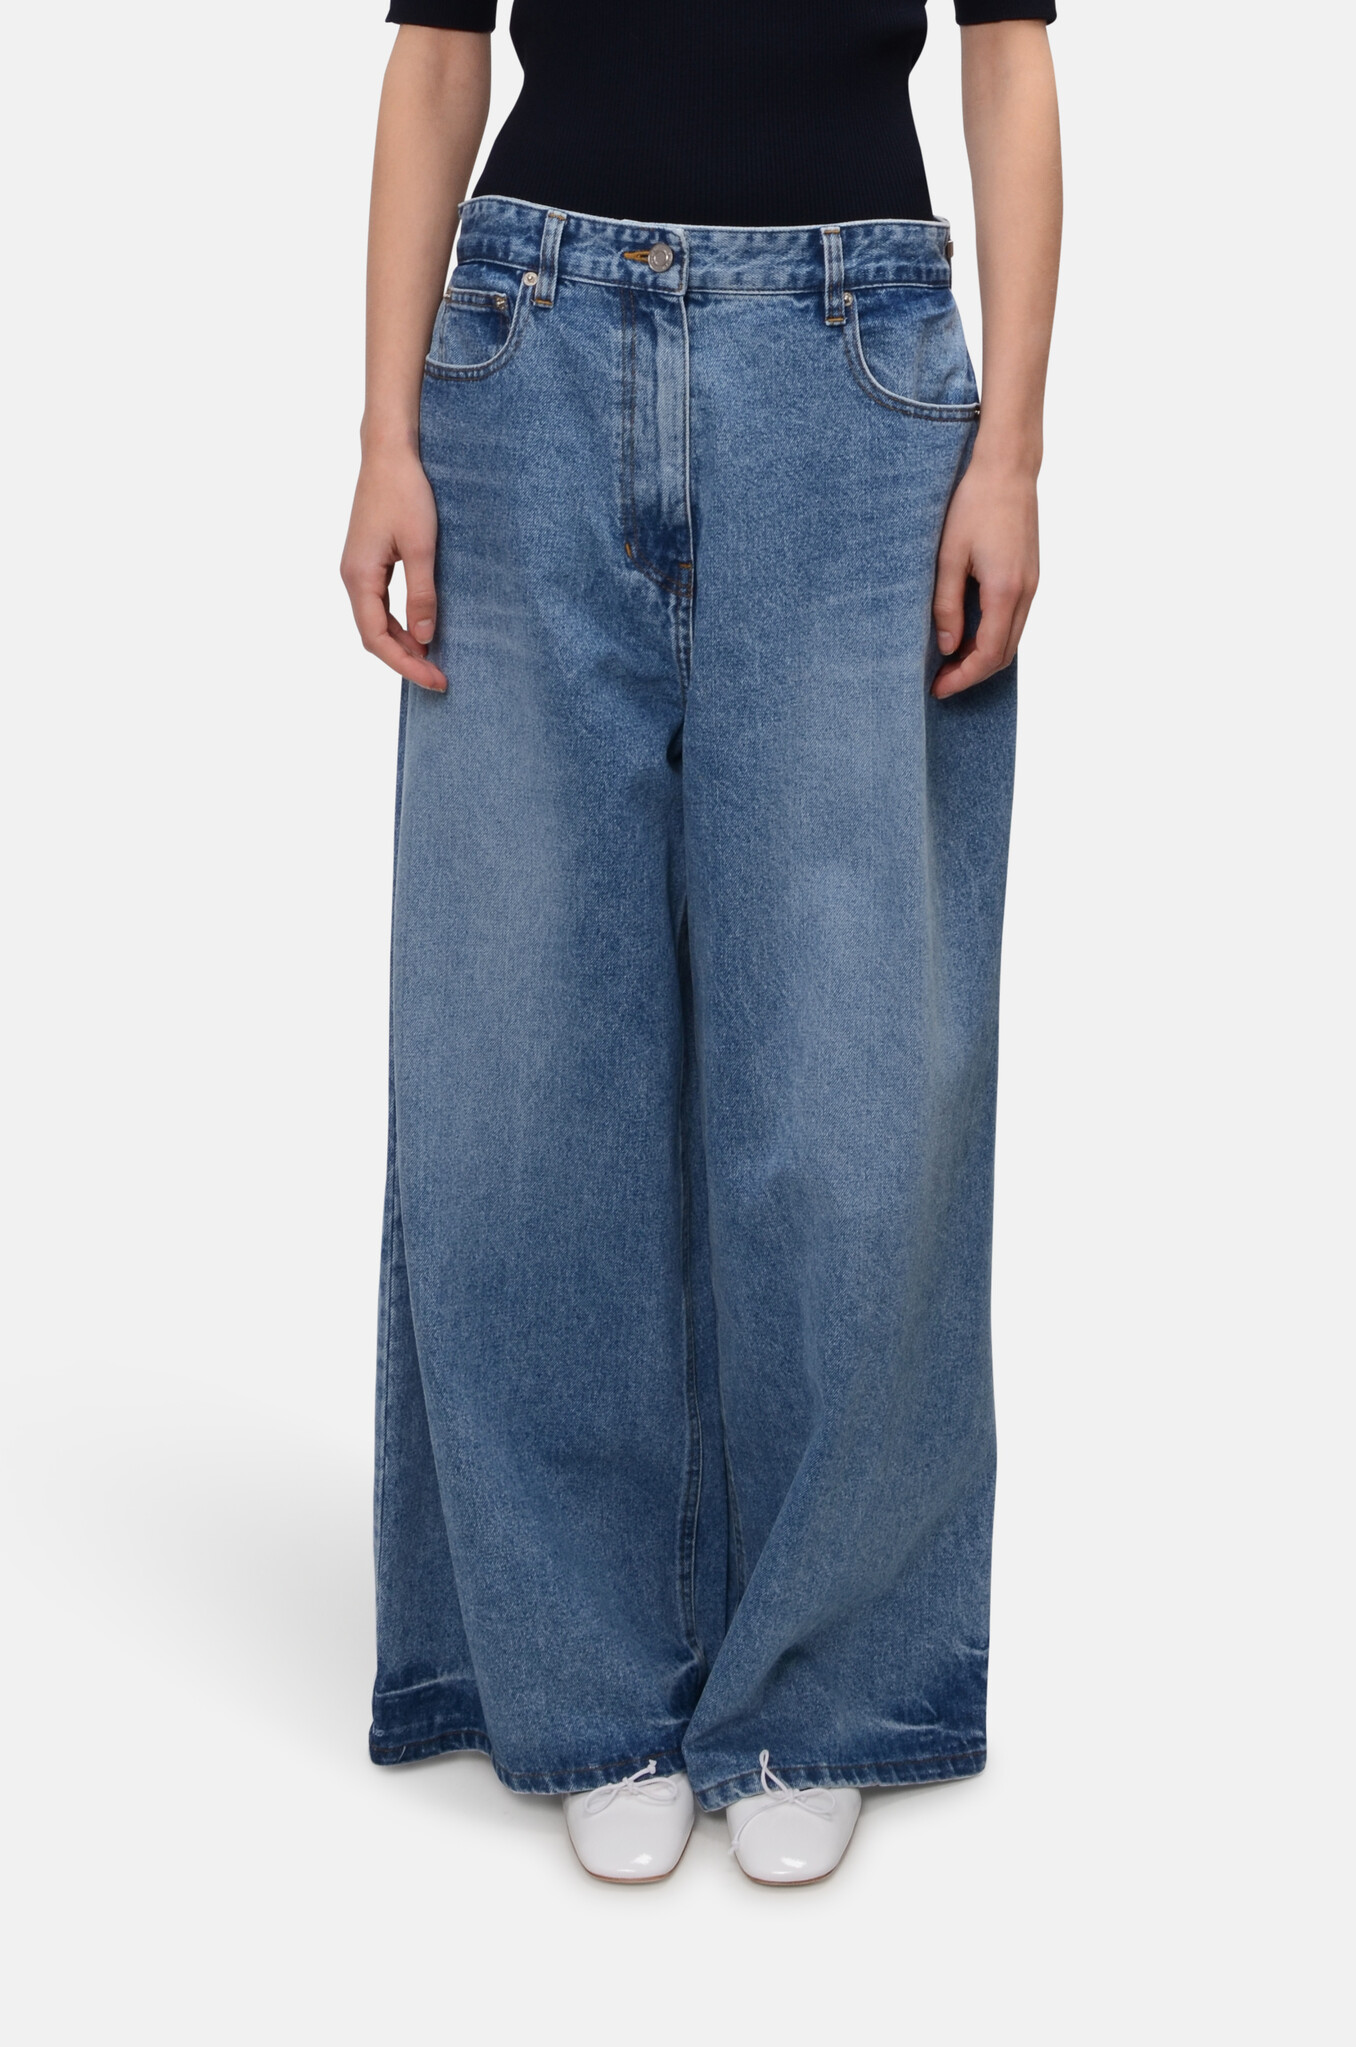 Double Tucked Jeans in Smoke Blue-1